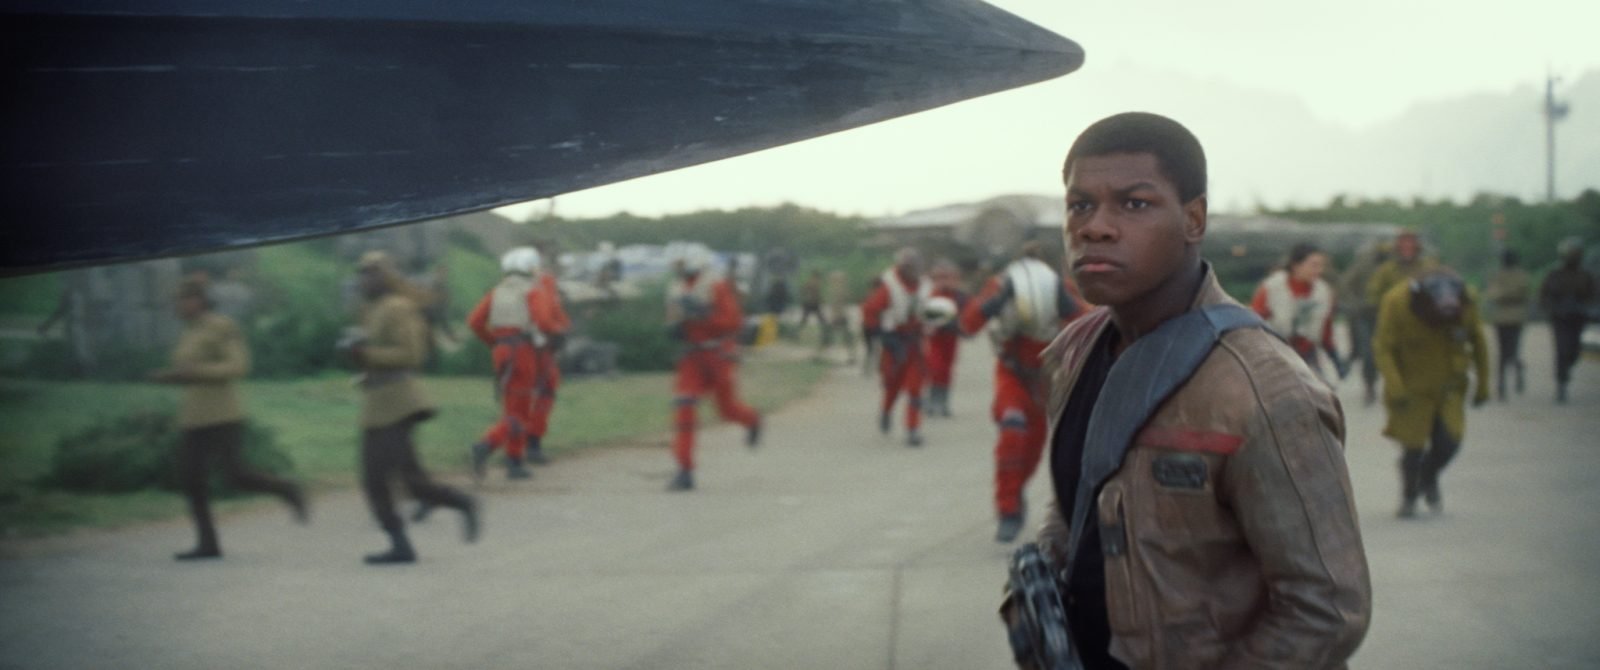 Star Wars VII The Force Awakens 4 - Finn with Resistance Soldiers